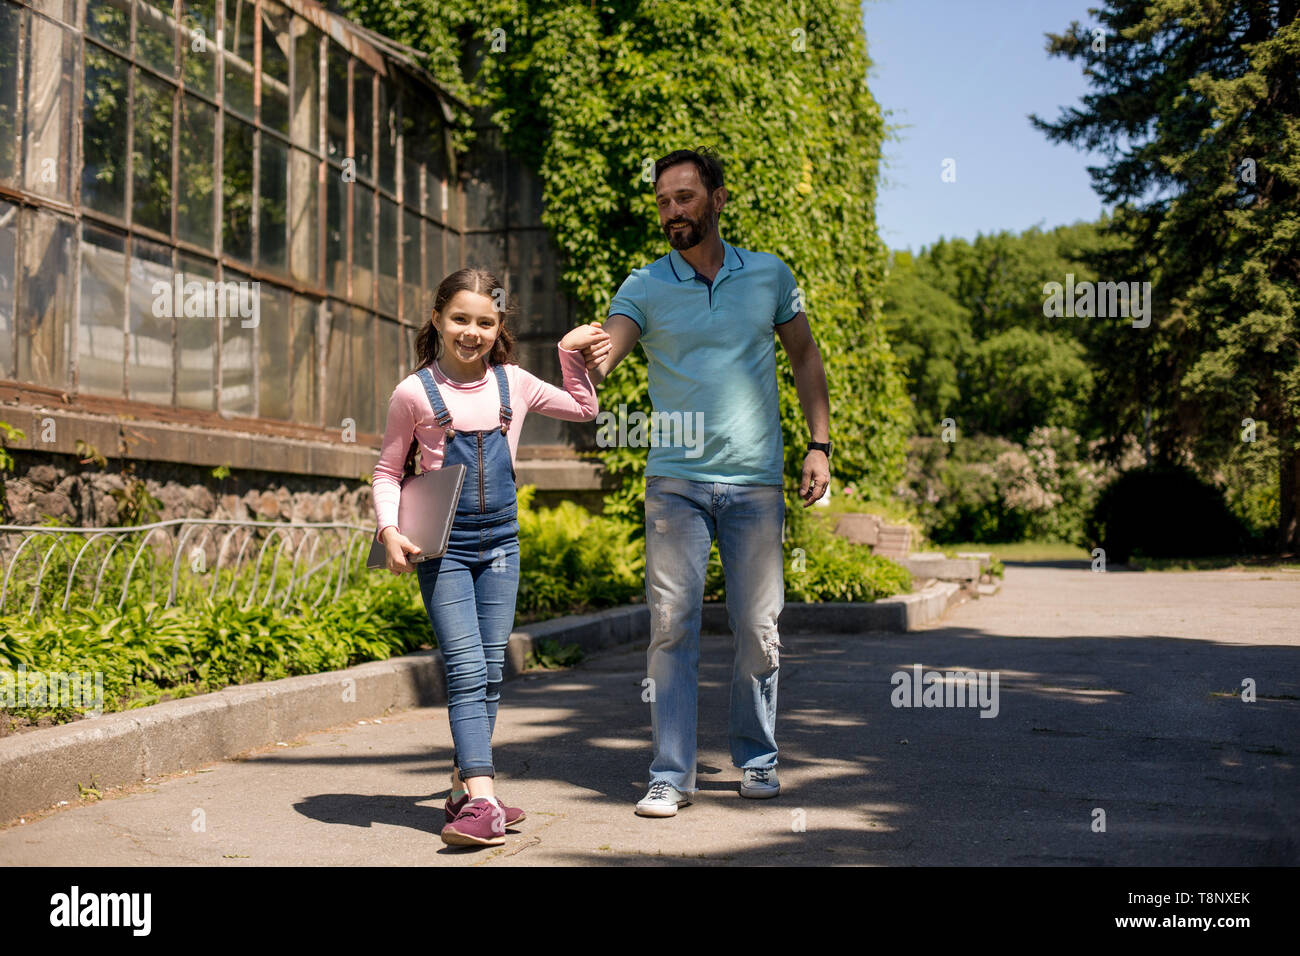 Daughter Is Leading Her Father While Holding Silver Laptop Outdoors. Stock Photo